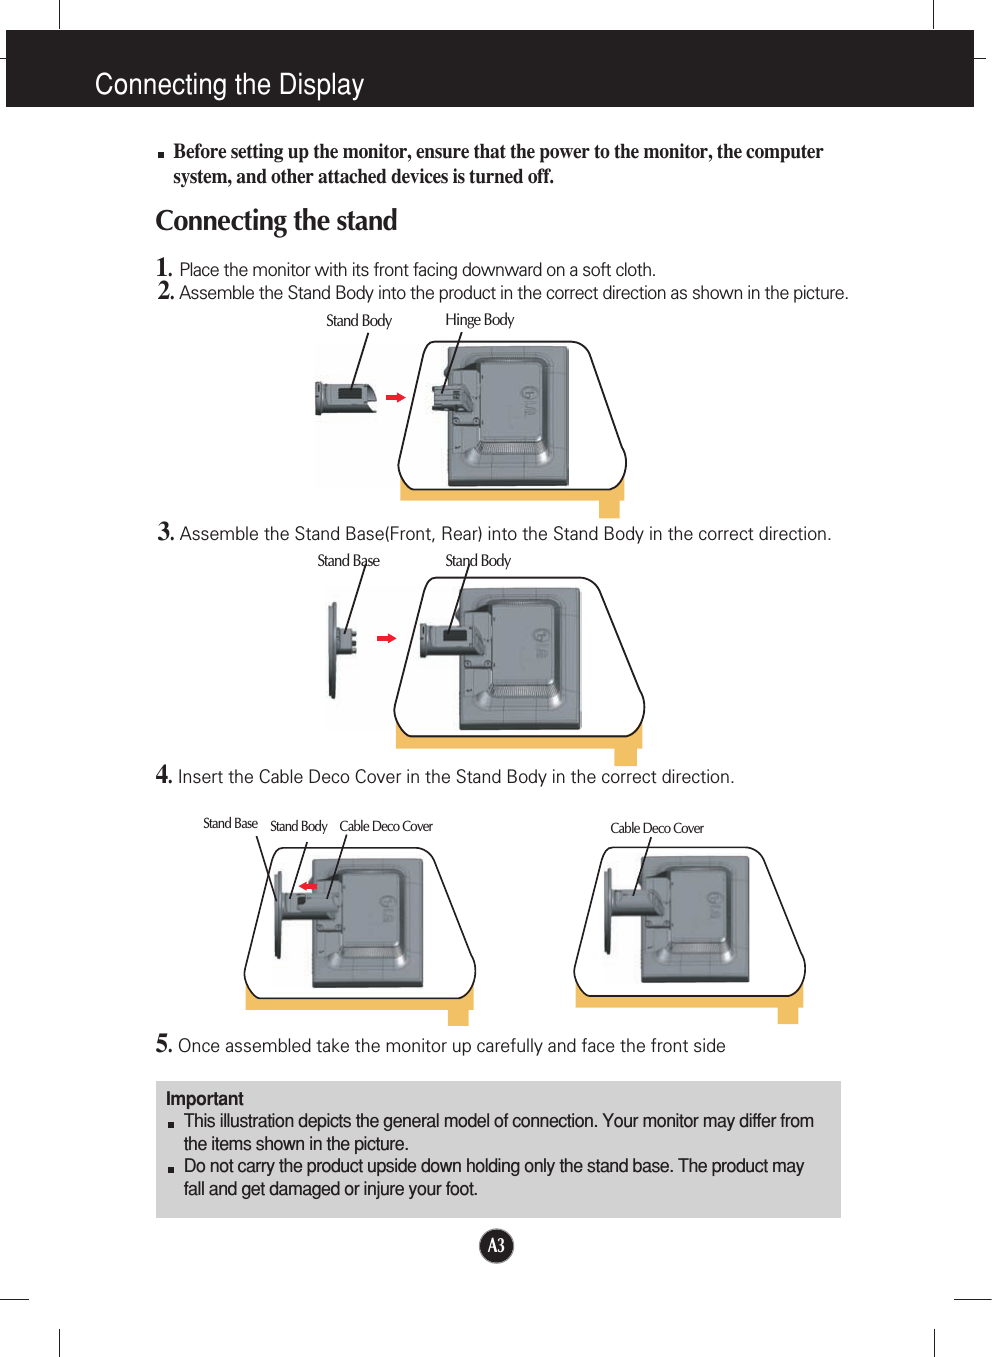 A3Connecting the DisplayImportantThis illustration depicts the general model of connection. Your monitor may differ fromthe items shown in the picture.Do not carry the product upside down holding only the stand base. The product mayfall and get damaged or injure your foot.Before setting up the monitor, ensure that the power to the monitor, the computersystem, and other attached devices is turned off.Connecting the stand 1.Place the monitor with its front facing downward on a soft cloth.2.Assemble the Stand Body into the product in the correct direction as shown in the picture. 3.Assemble the Stand Base(Front, Rear) into the Stand Body in the correct direction.Stand BodyStand BaseStand Body Hinge Body5.Once assembled take the monitor up carefully and face the front side4.Insert the Cable Deco Cover in the Stand Body in the correct direction.Stand BodyStand Base Cable Deco Cover Cable Deco Cover